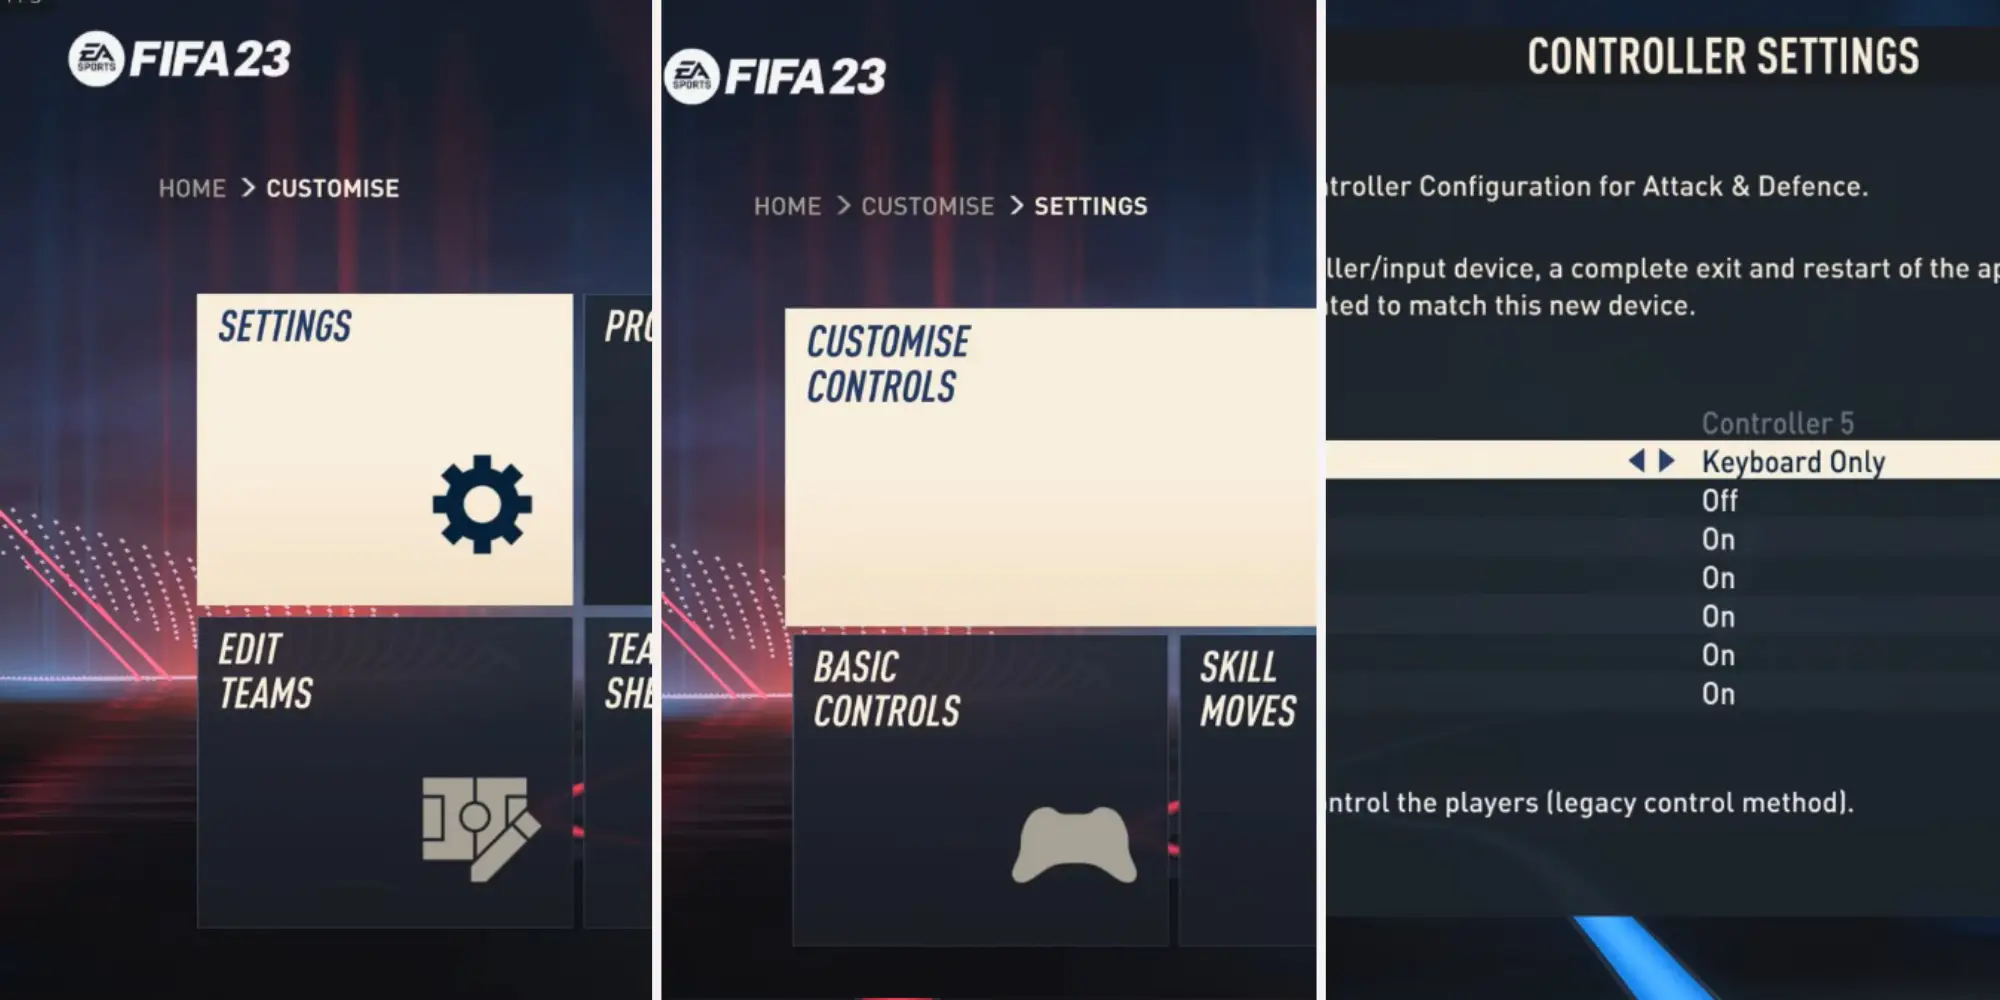 A guide on Best FIFA 23 Keyboard Controls settings